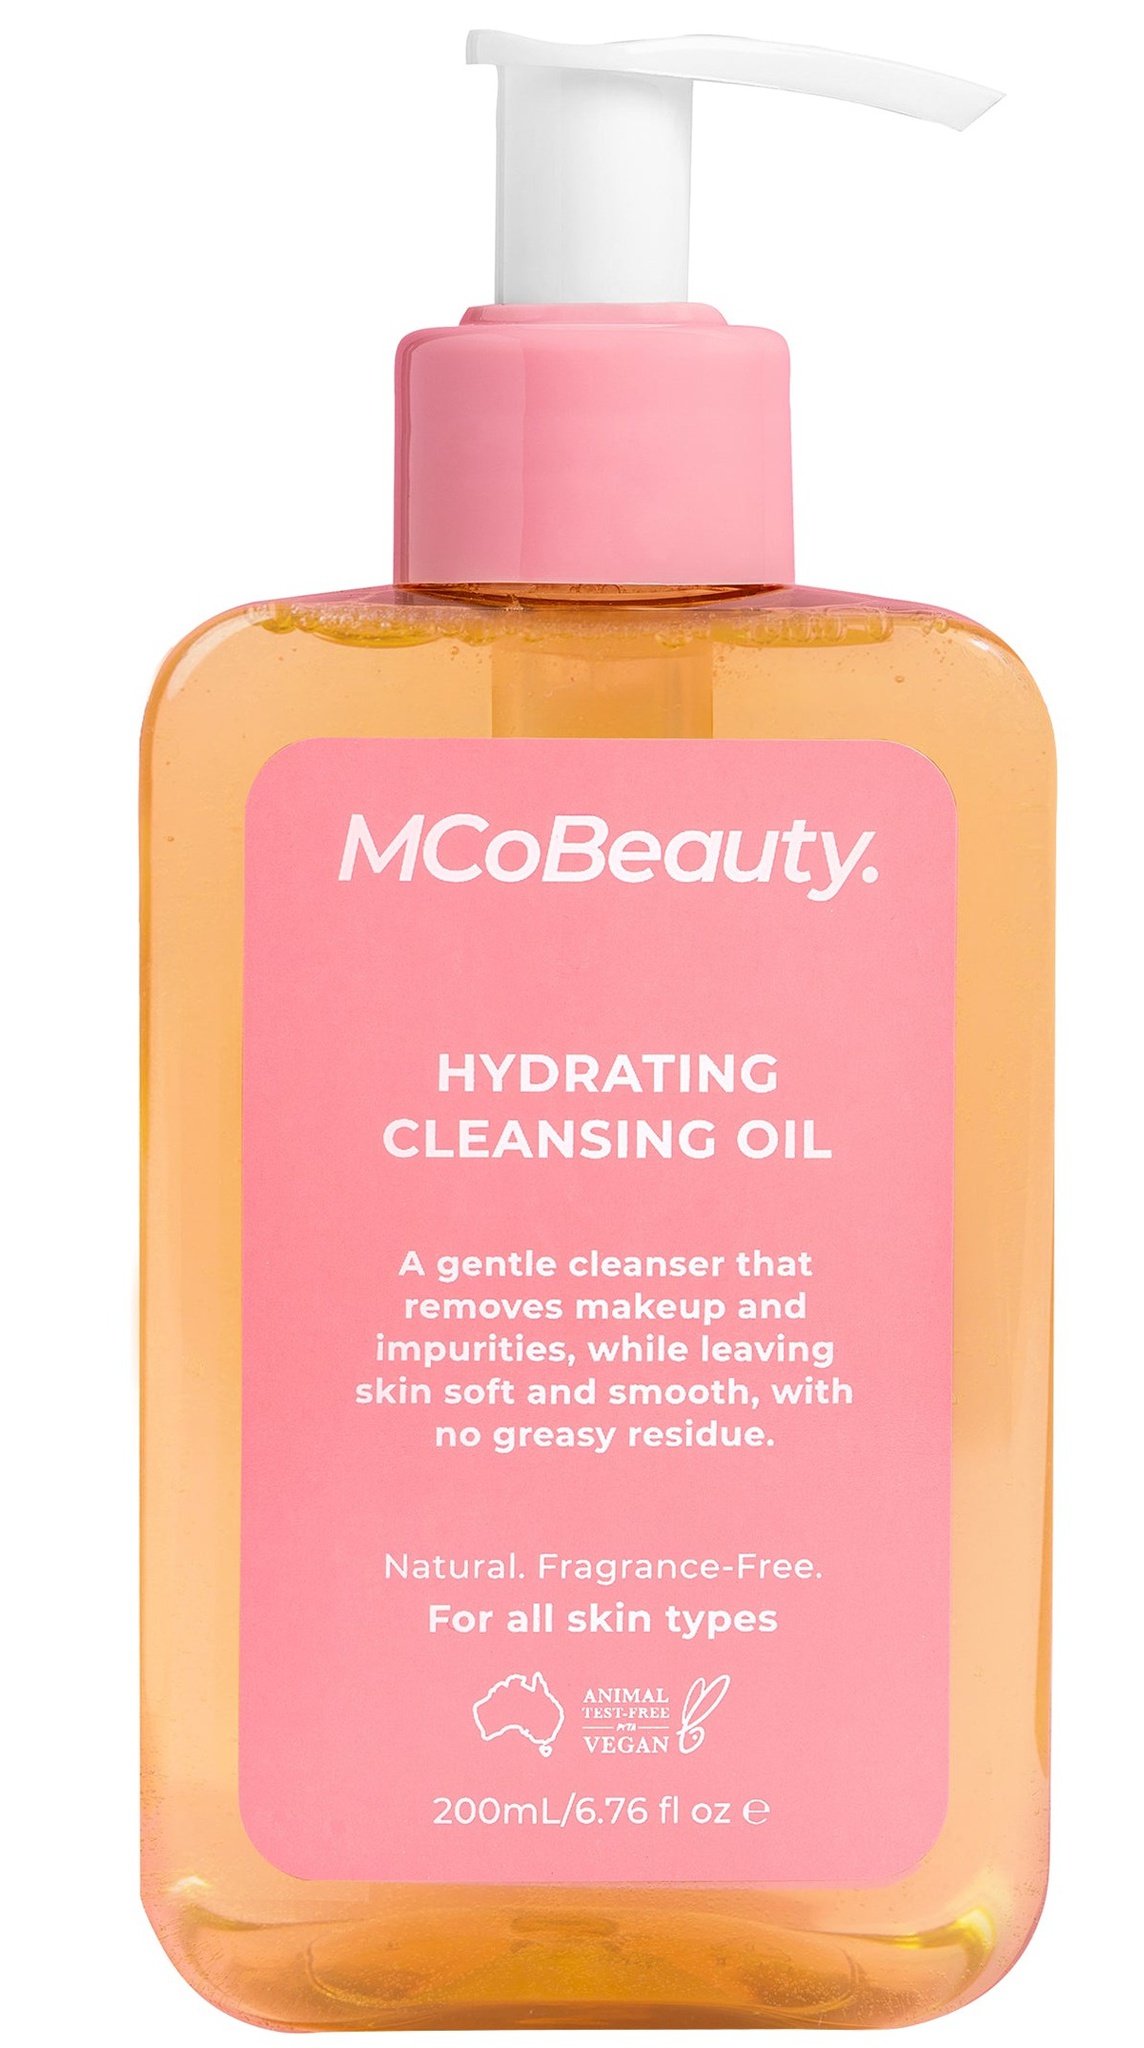 MCOBEAUTY Hydrating Cleansing Oil